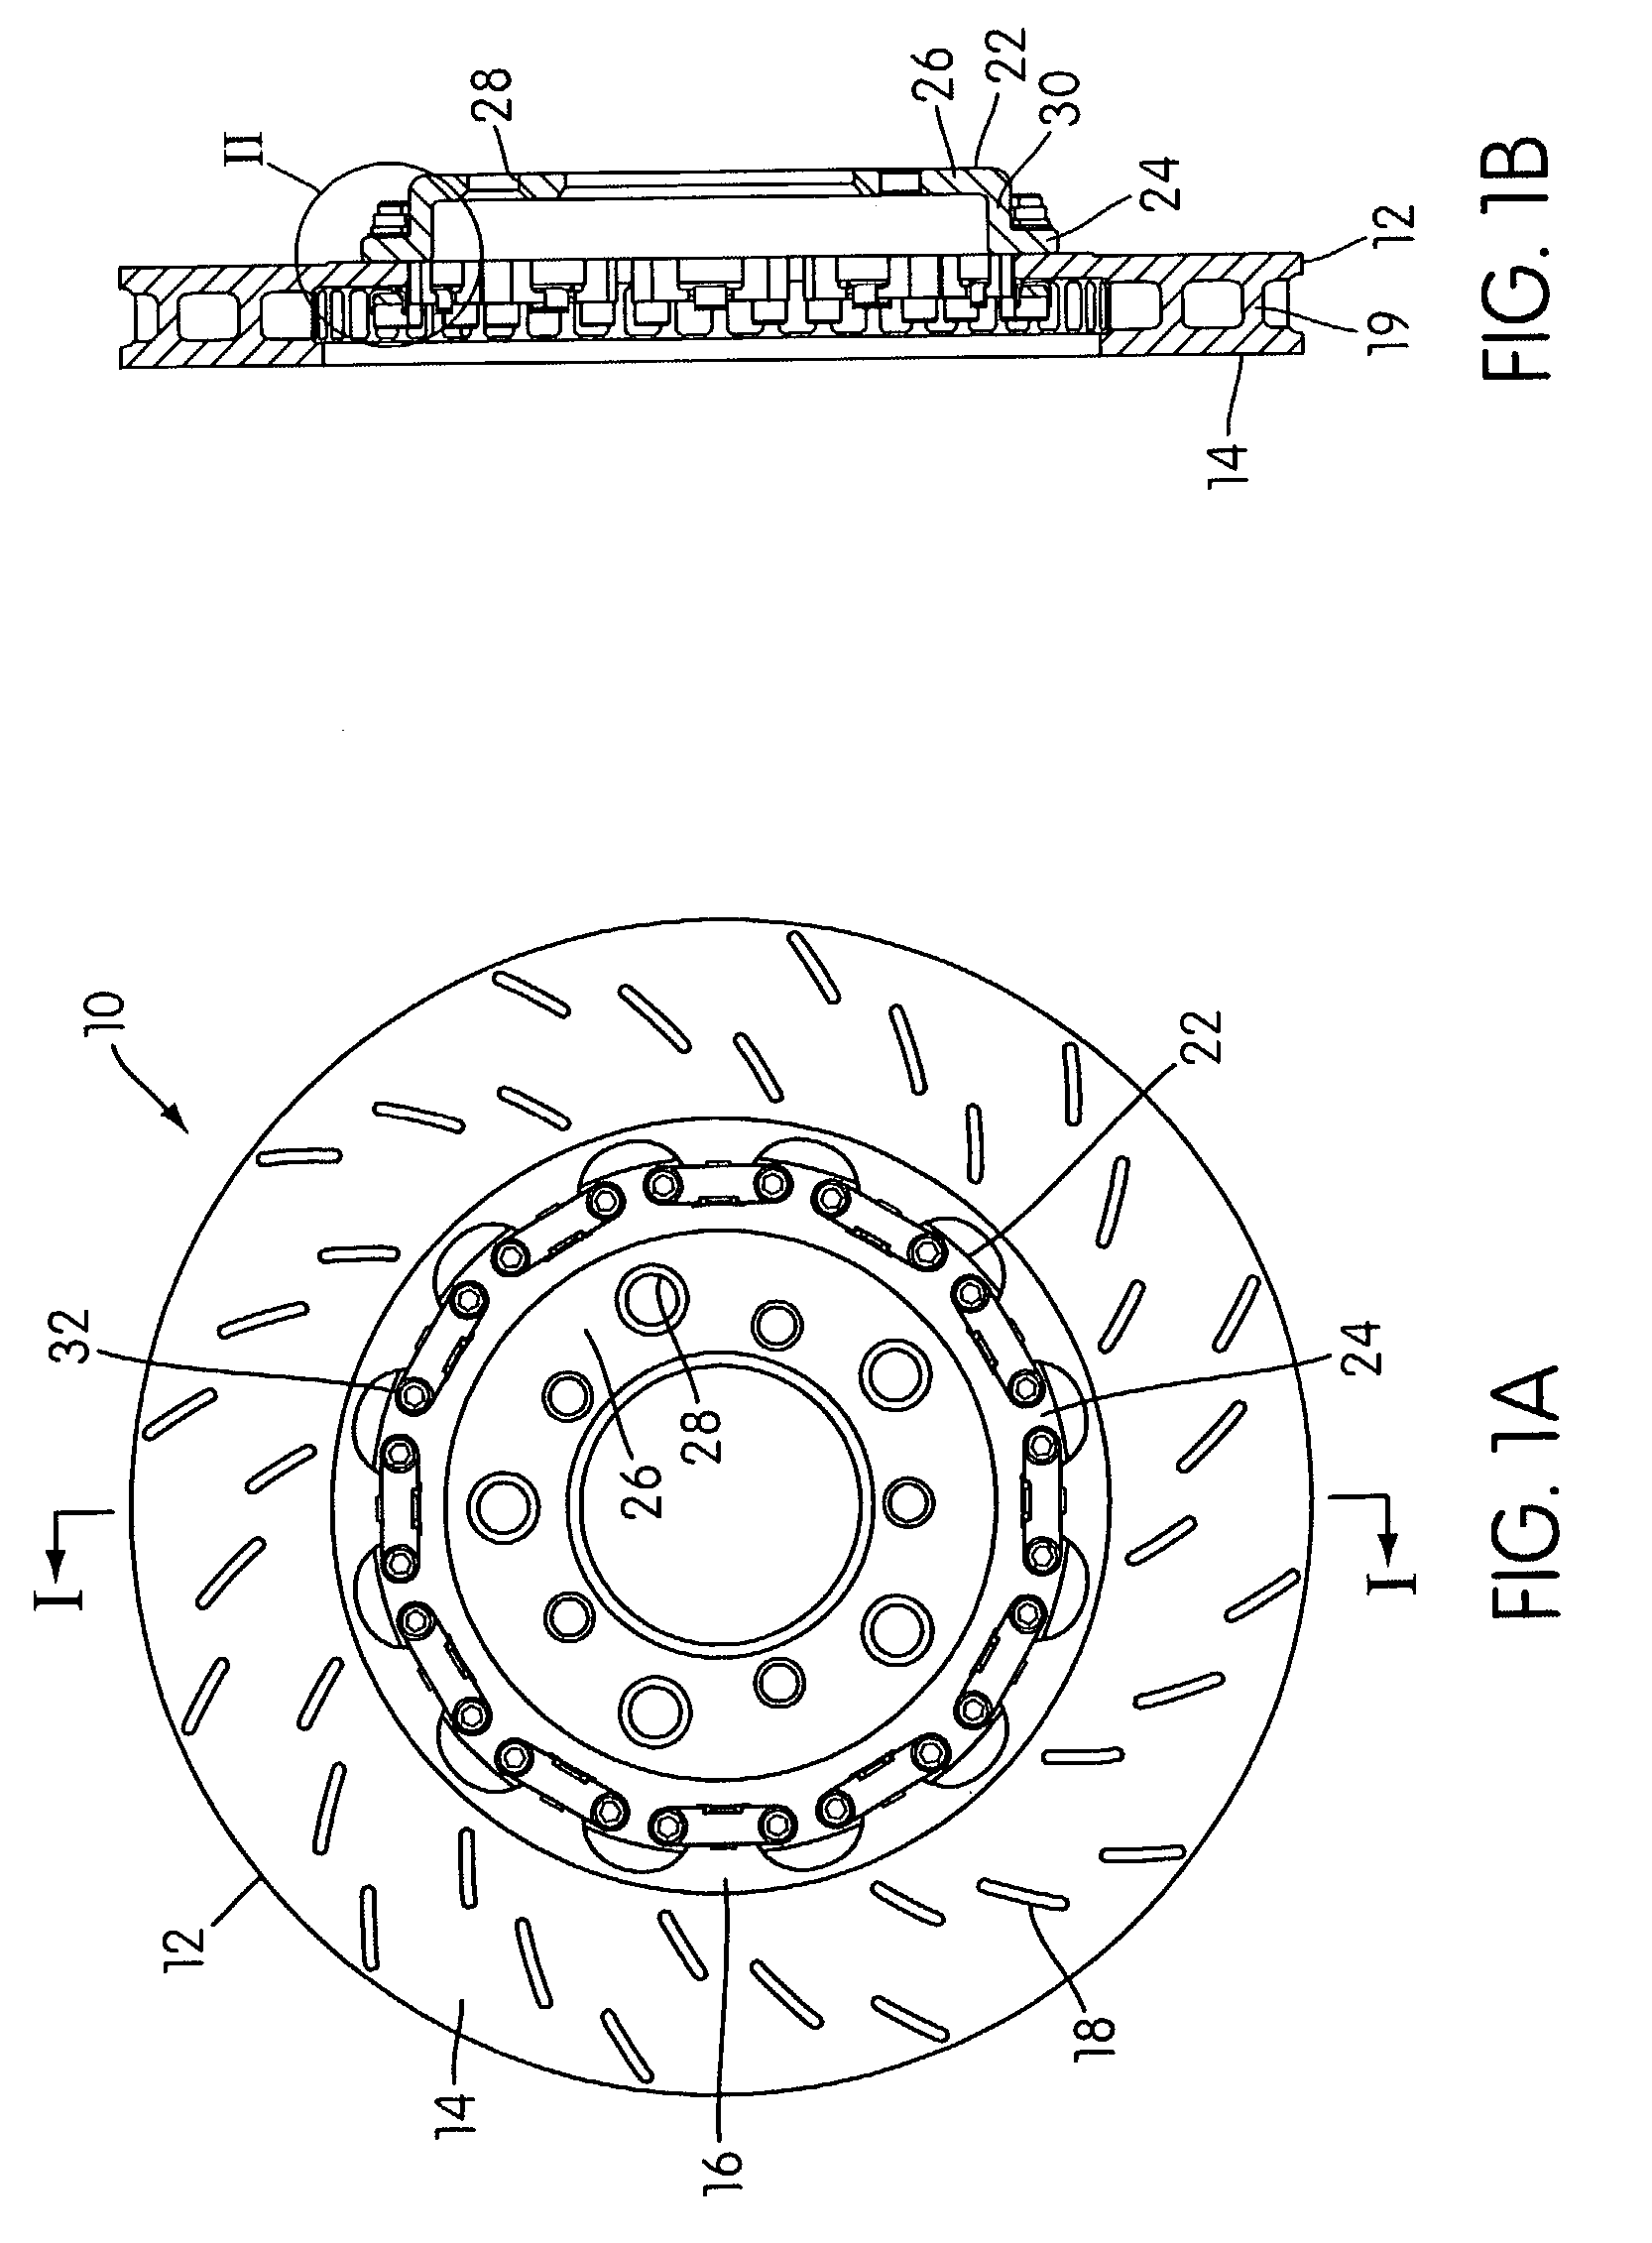 Brake rotor attachment assembly that promotes in plane uniform torque transfer distribution